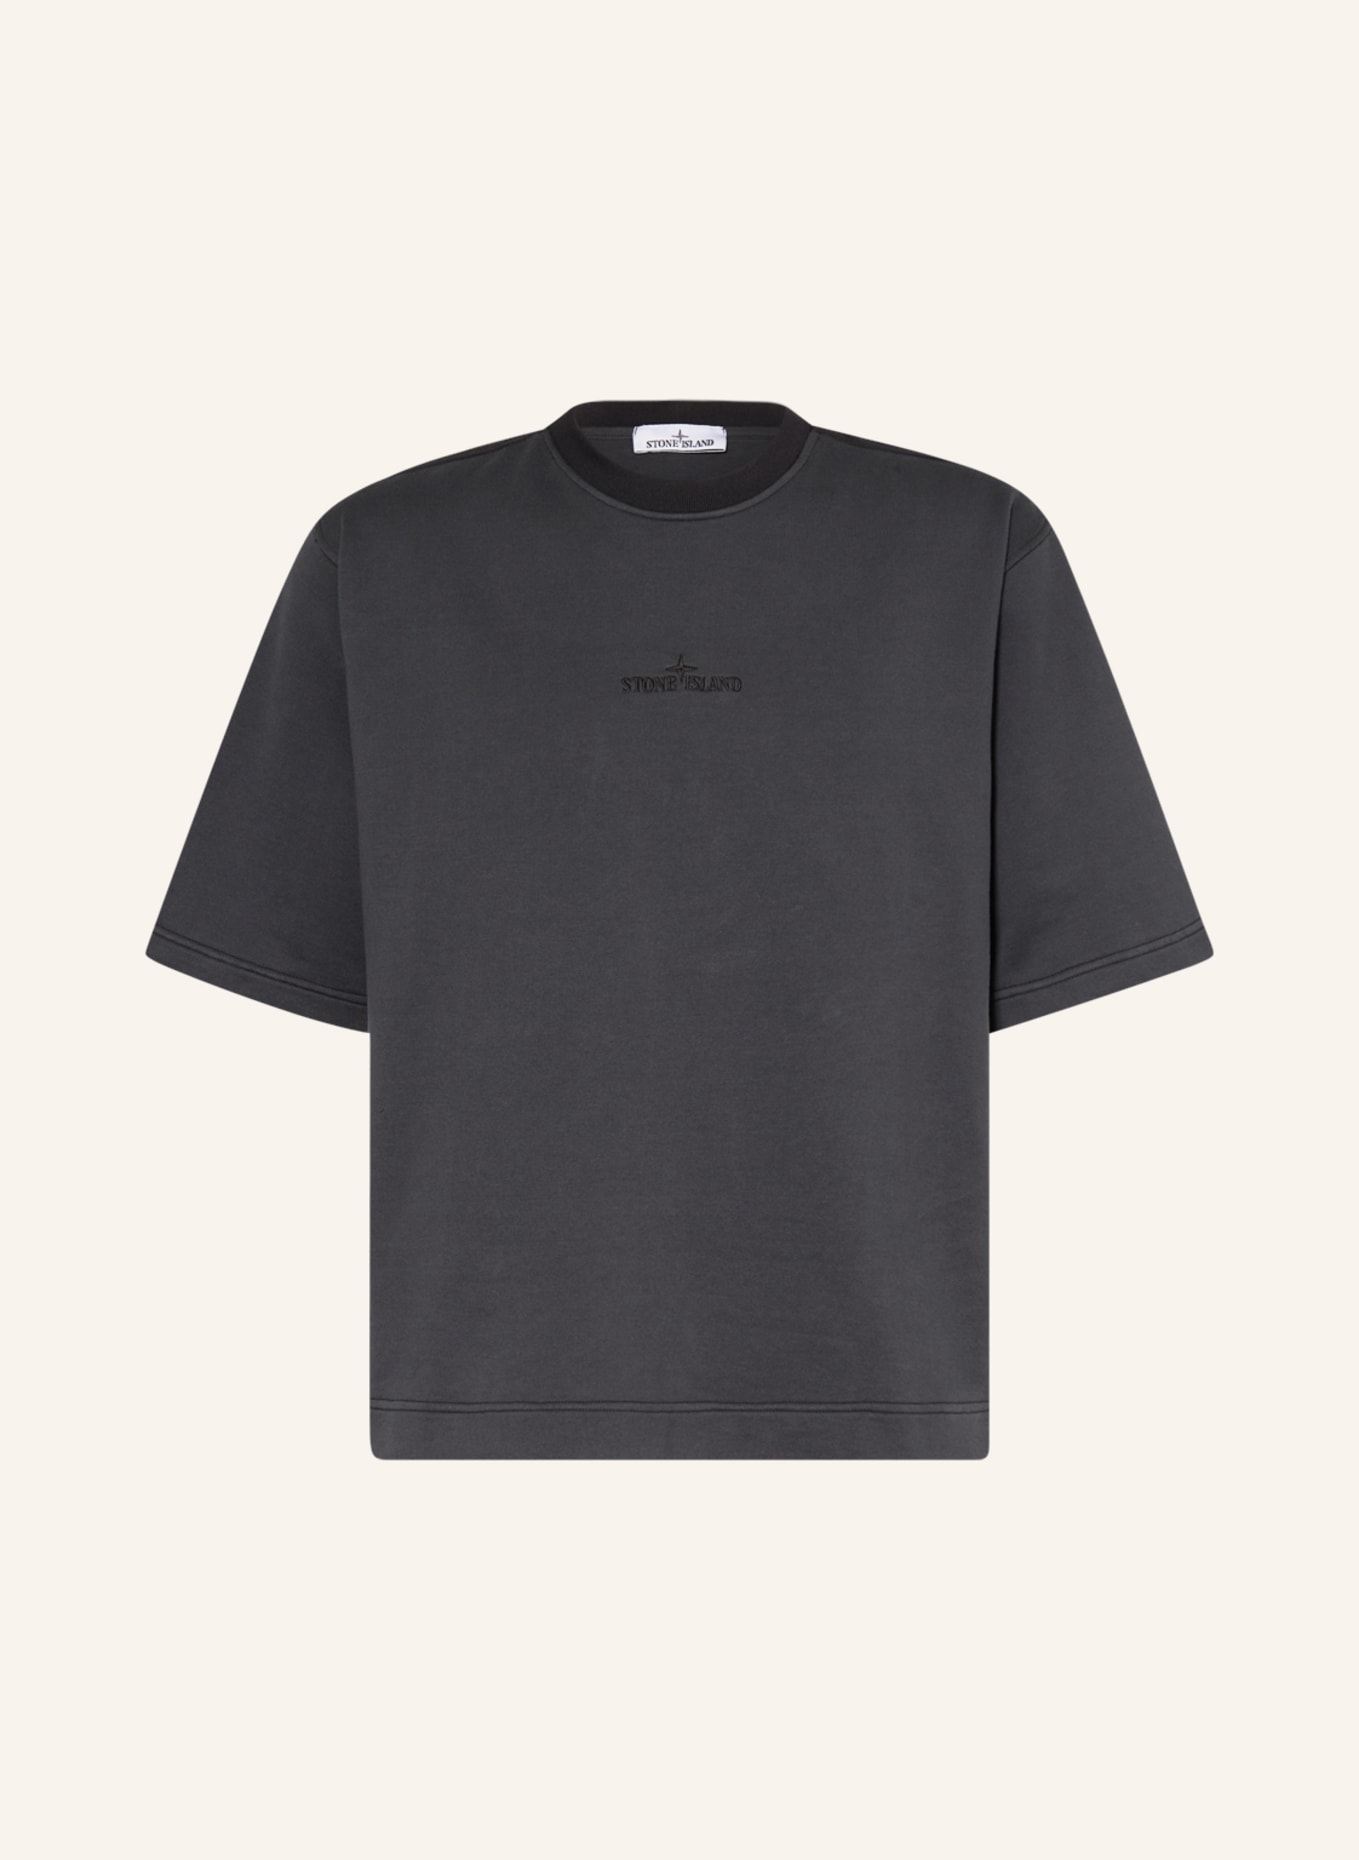 STONE ISLAND T-shirt in mixed materials, Color: DARK GRAY (Image 1)